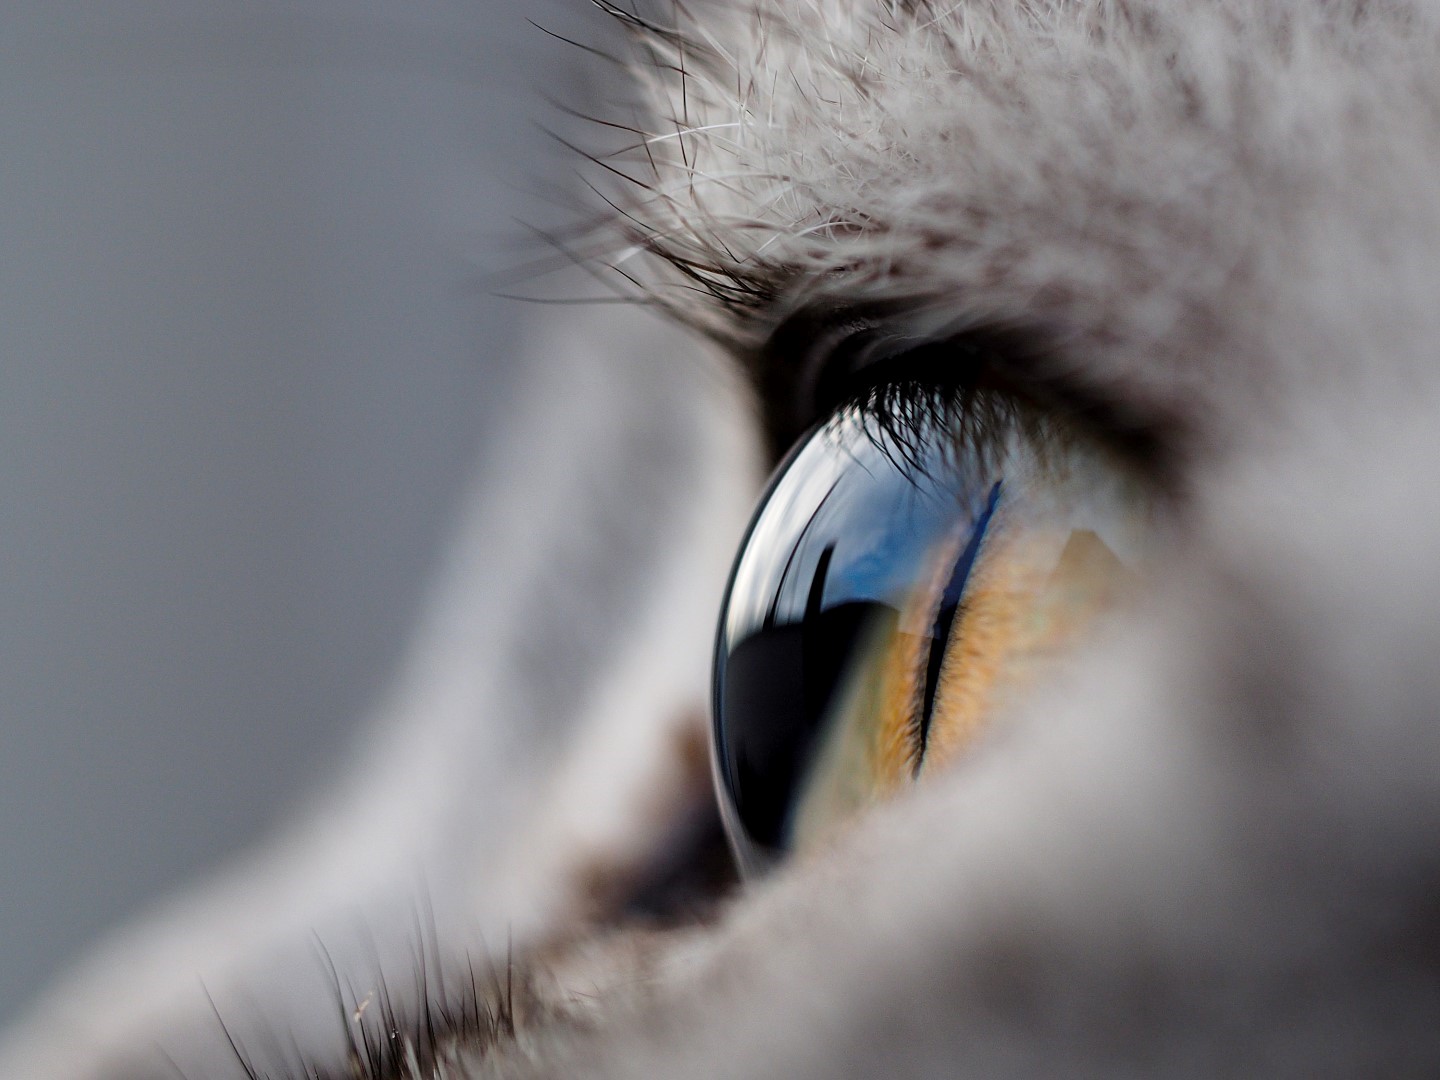 Human Vision vs. Cat Vision: Can Cats See Color?